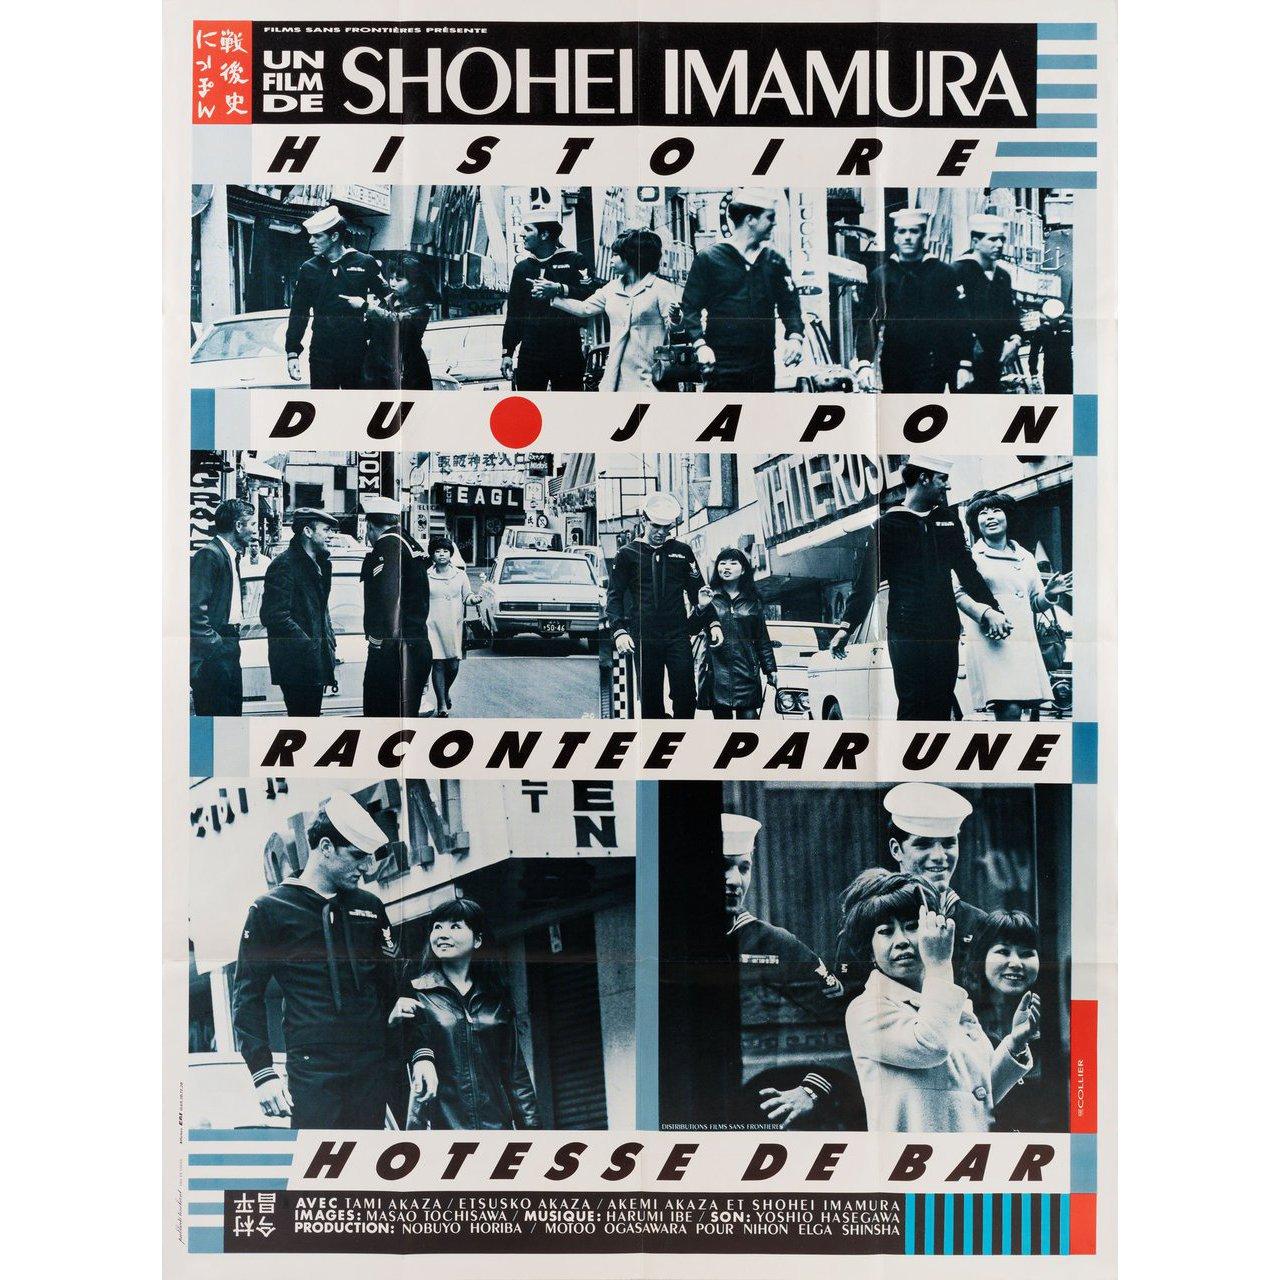 Original 1975 French grande poster for the first French theatrical release of the 1970 documentary film History of Postwar Japan as Told by a Bar Hostess directed by Shohei Imamura with Chieko Akaza / Etsuko Akaza / Tami Akaza. Very Good-Fine